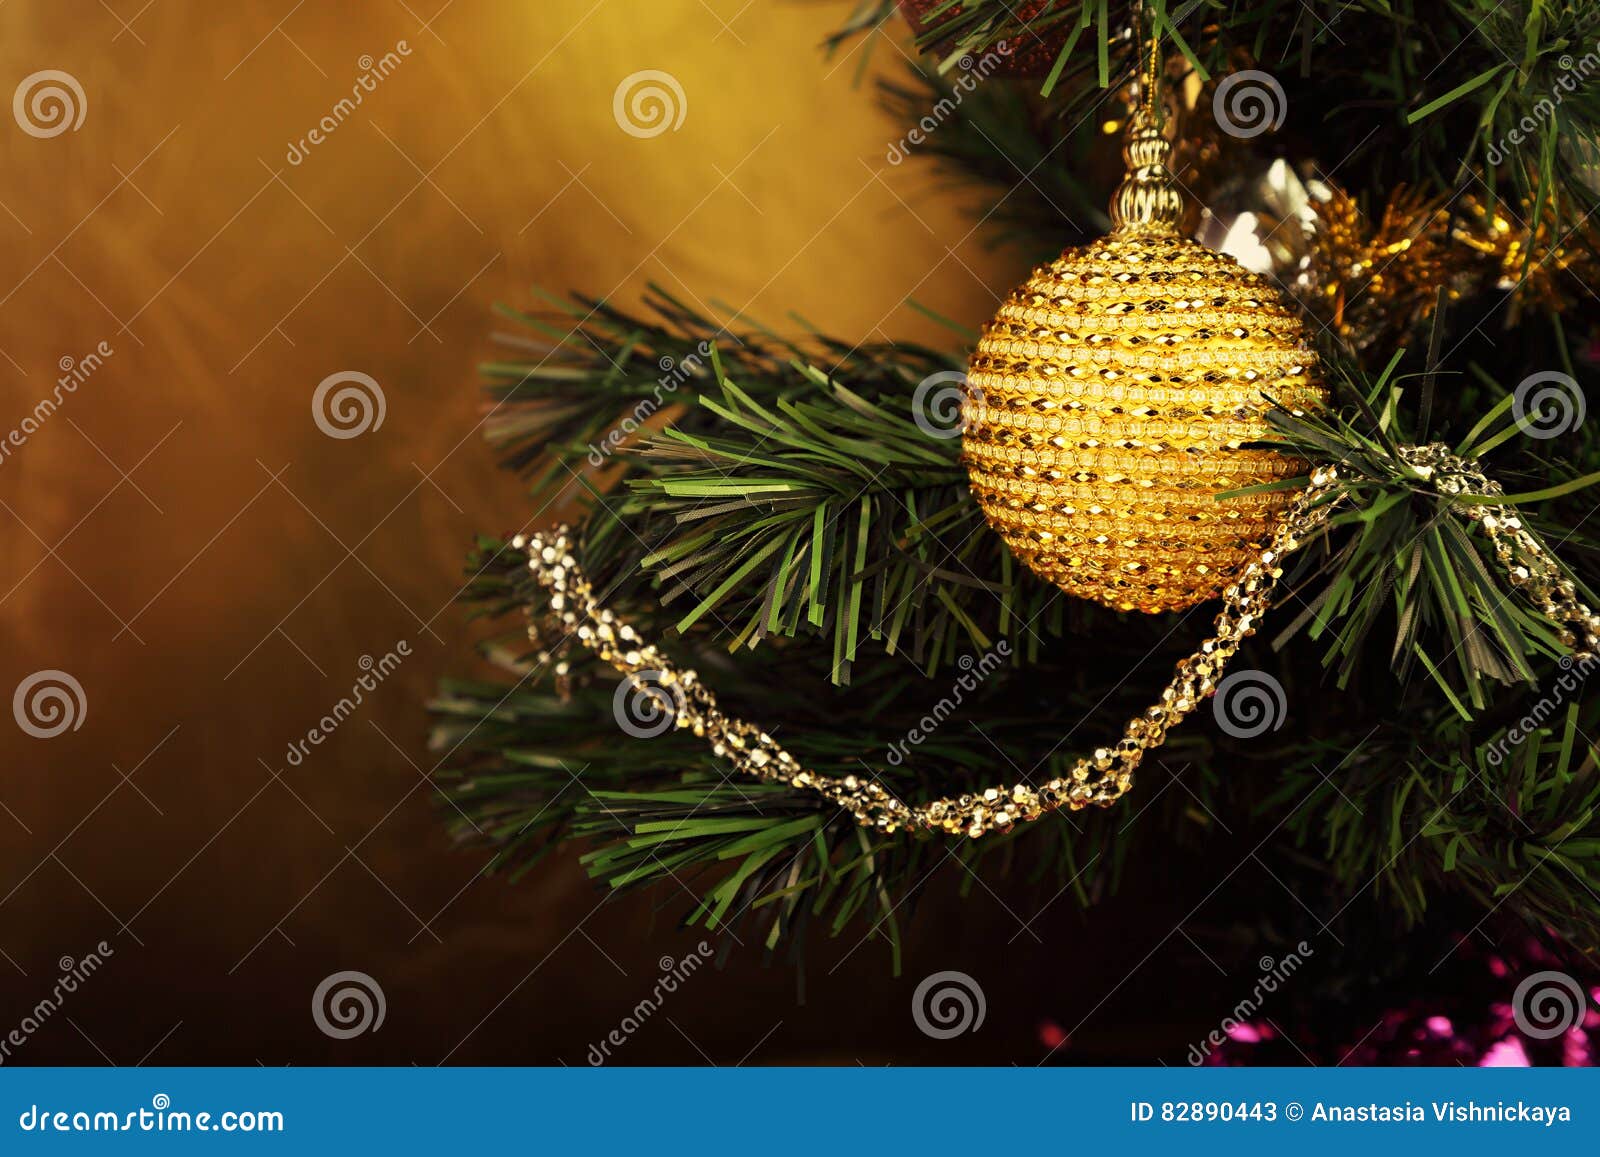 Beautiful Christmas Green Tree with Yellow Ball on the Branches Stock ...